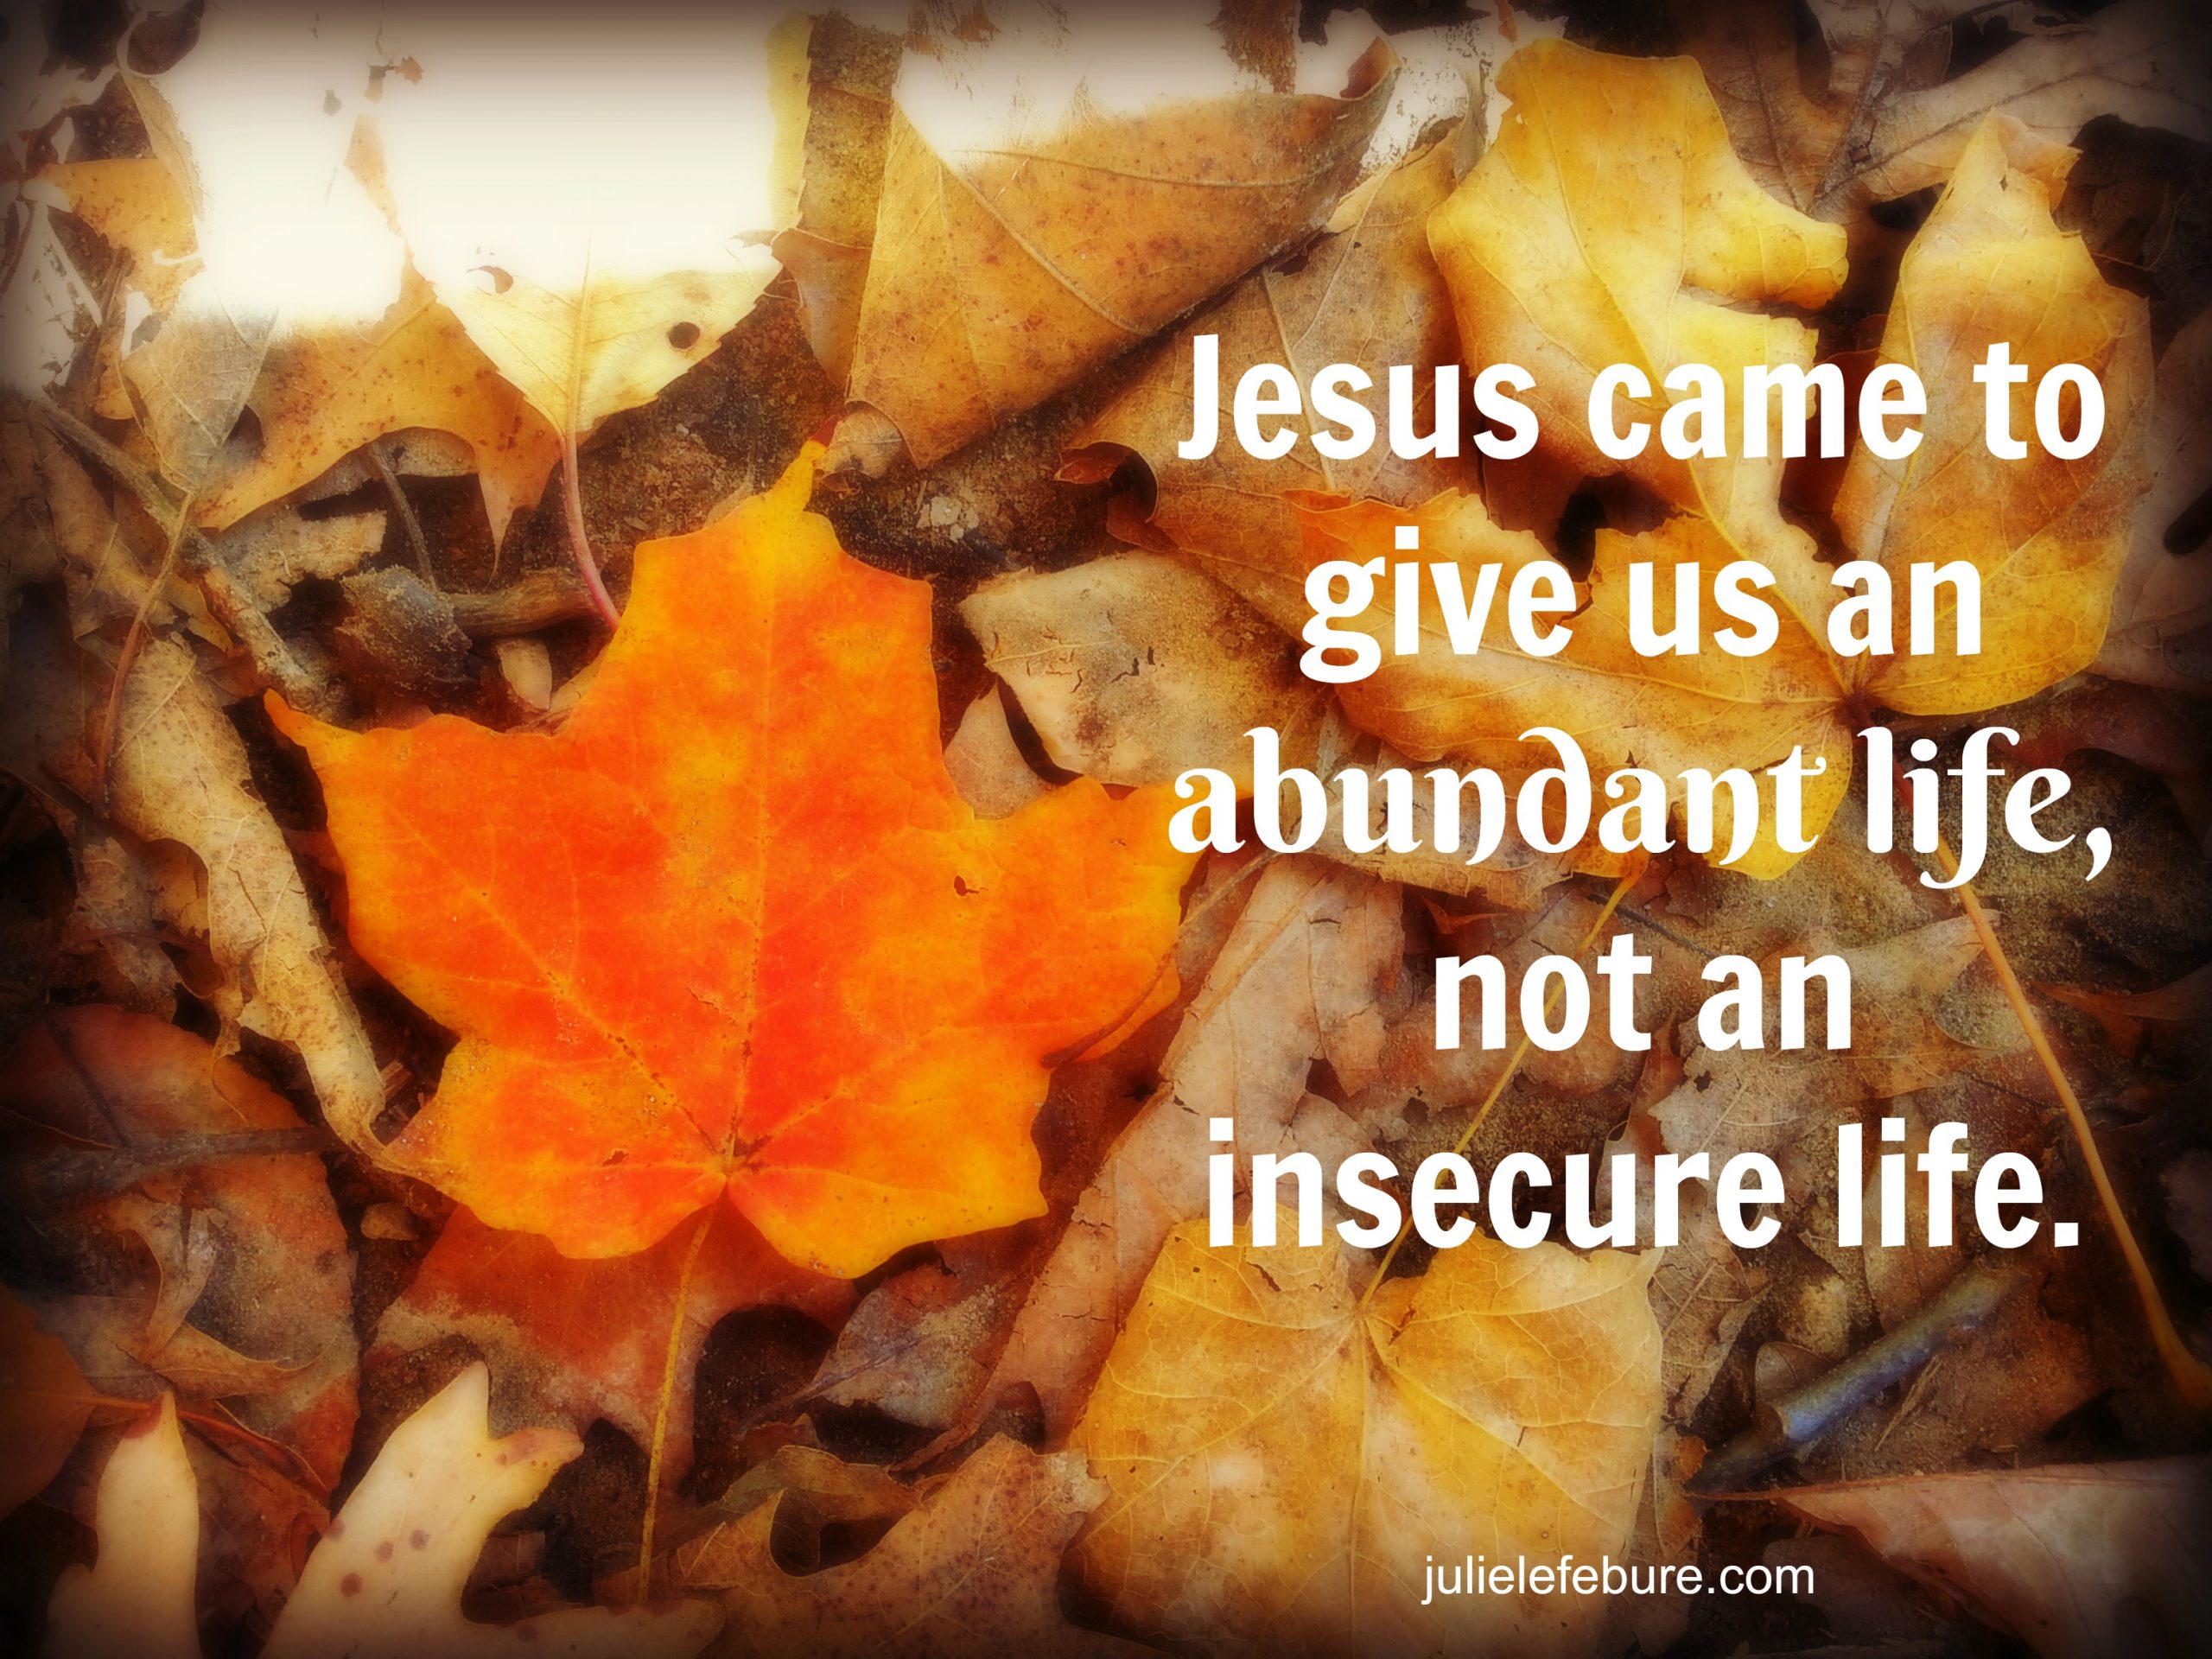 An Abundant Life Or An Insecure Life?